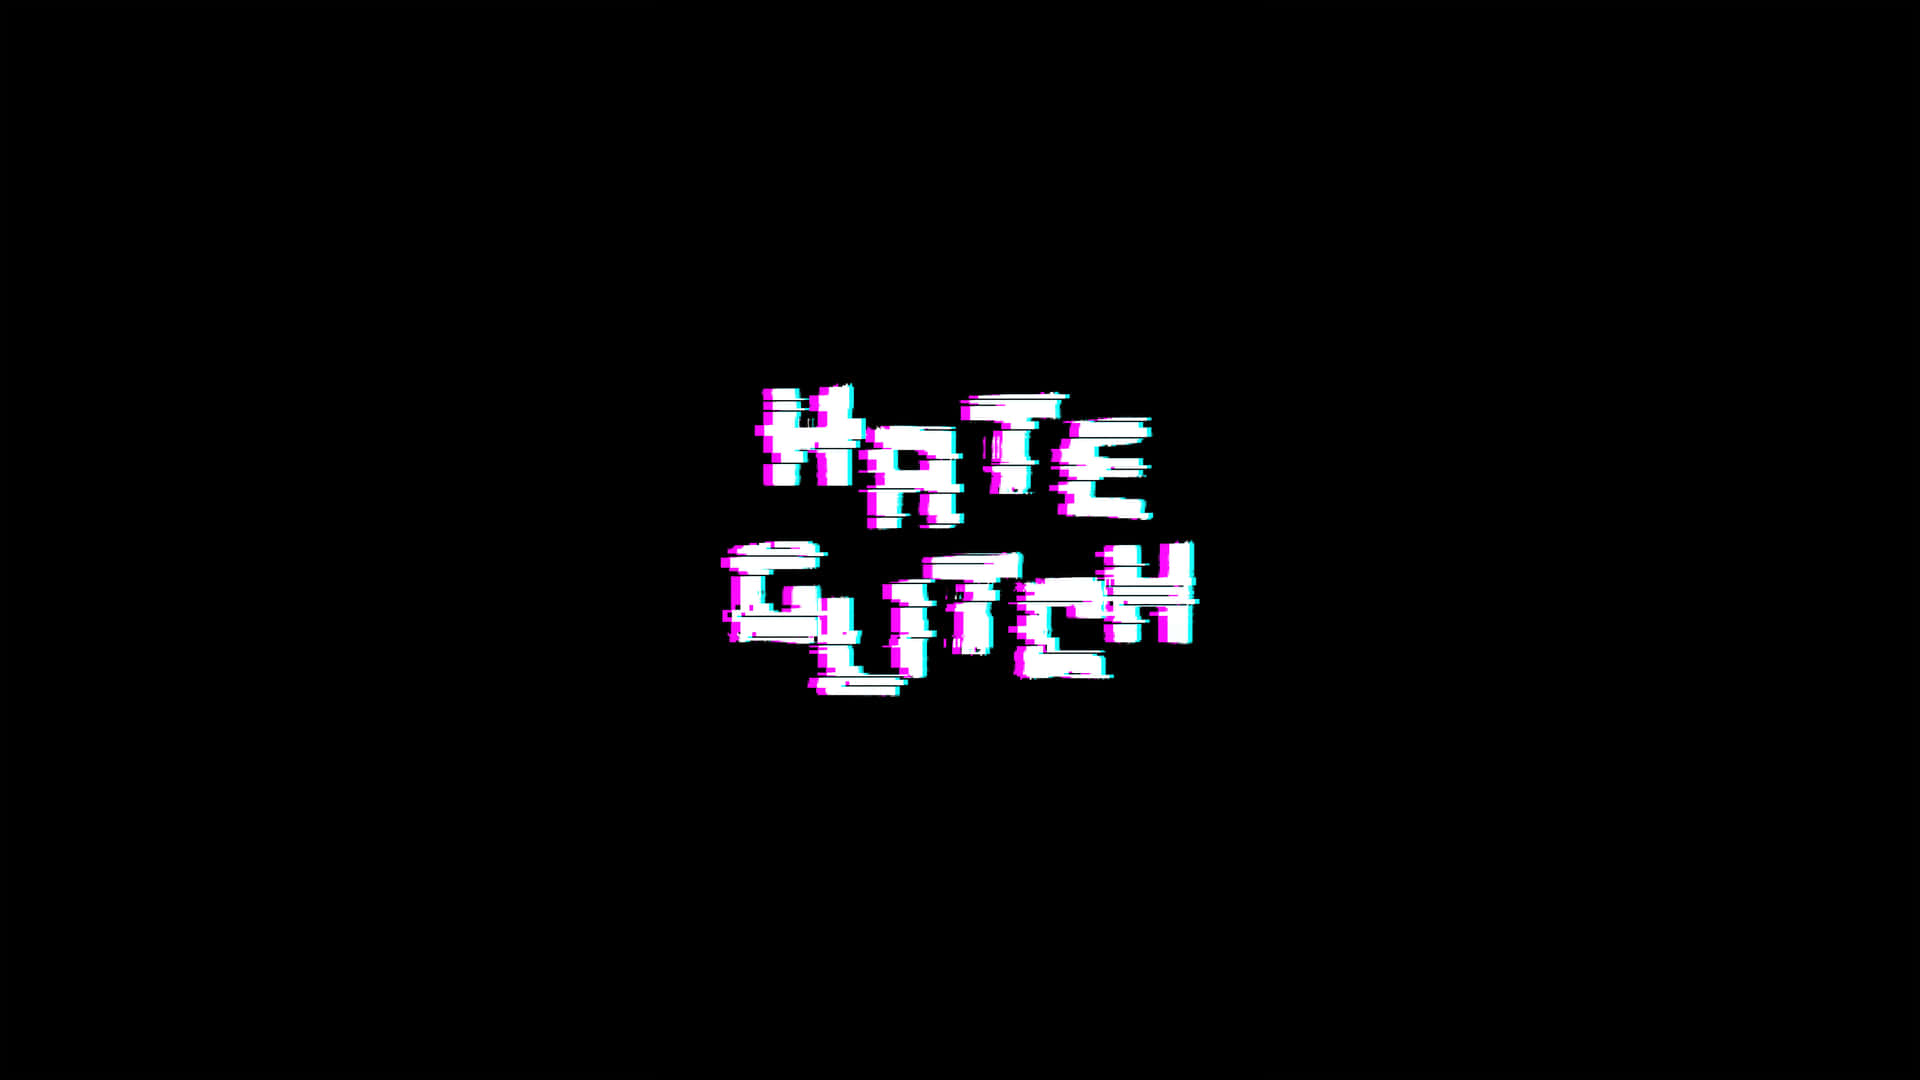 Glitchy Hate Synth Aesthetic.jpg Wallpaper